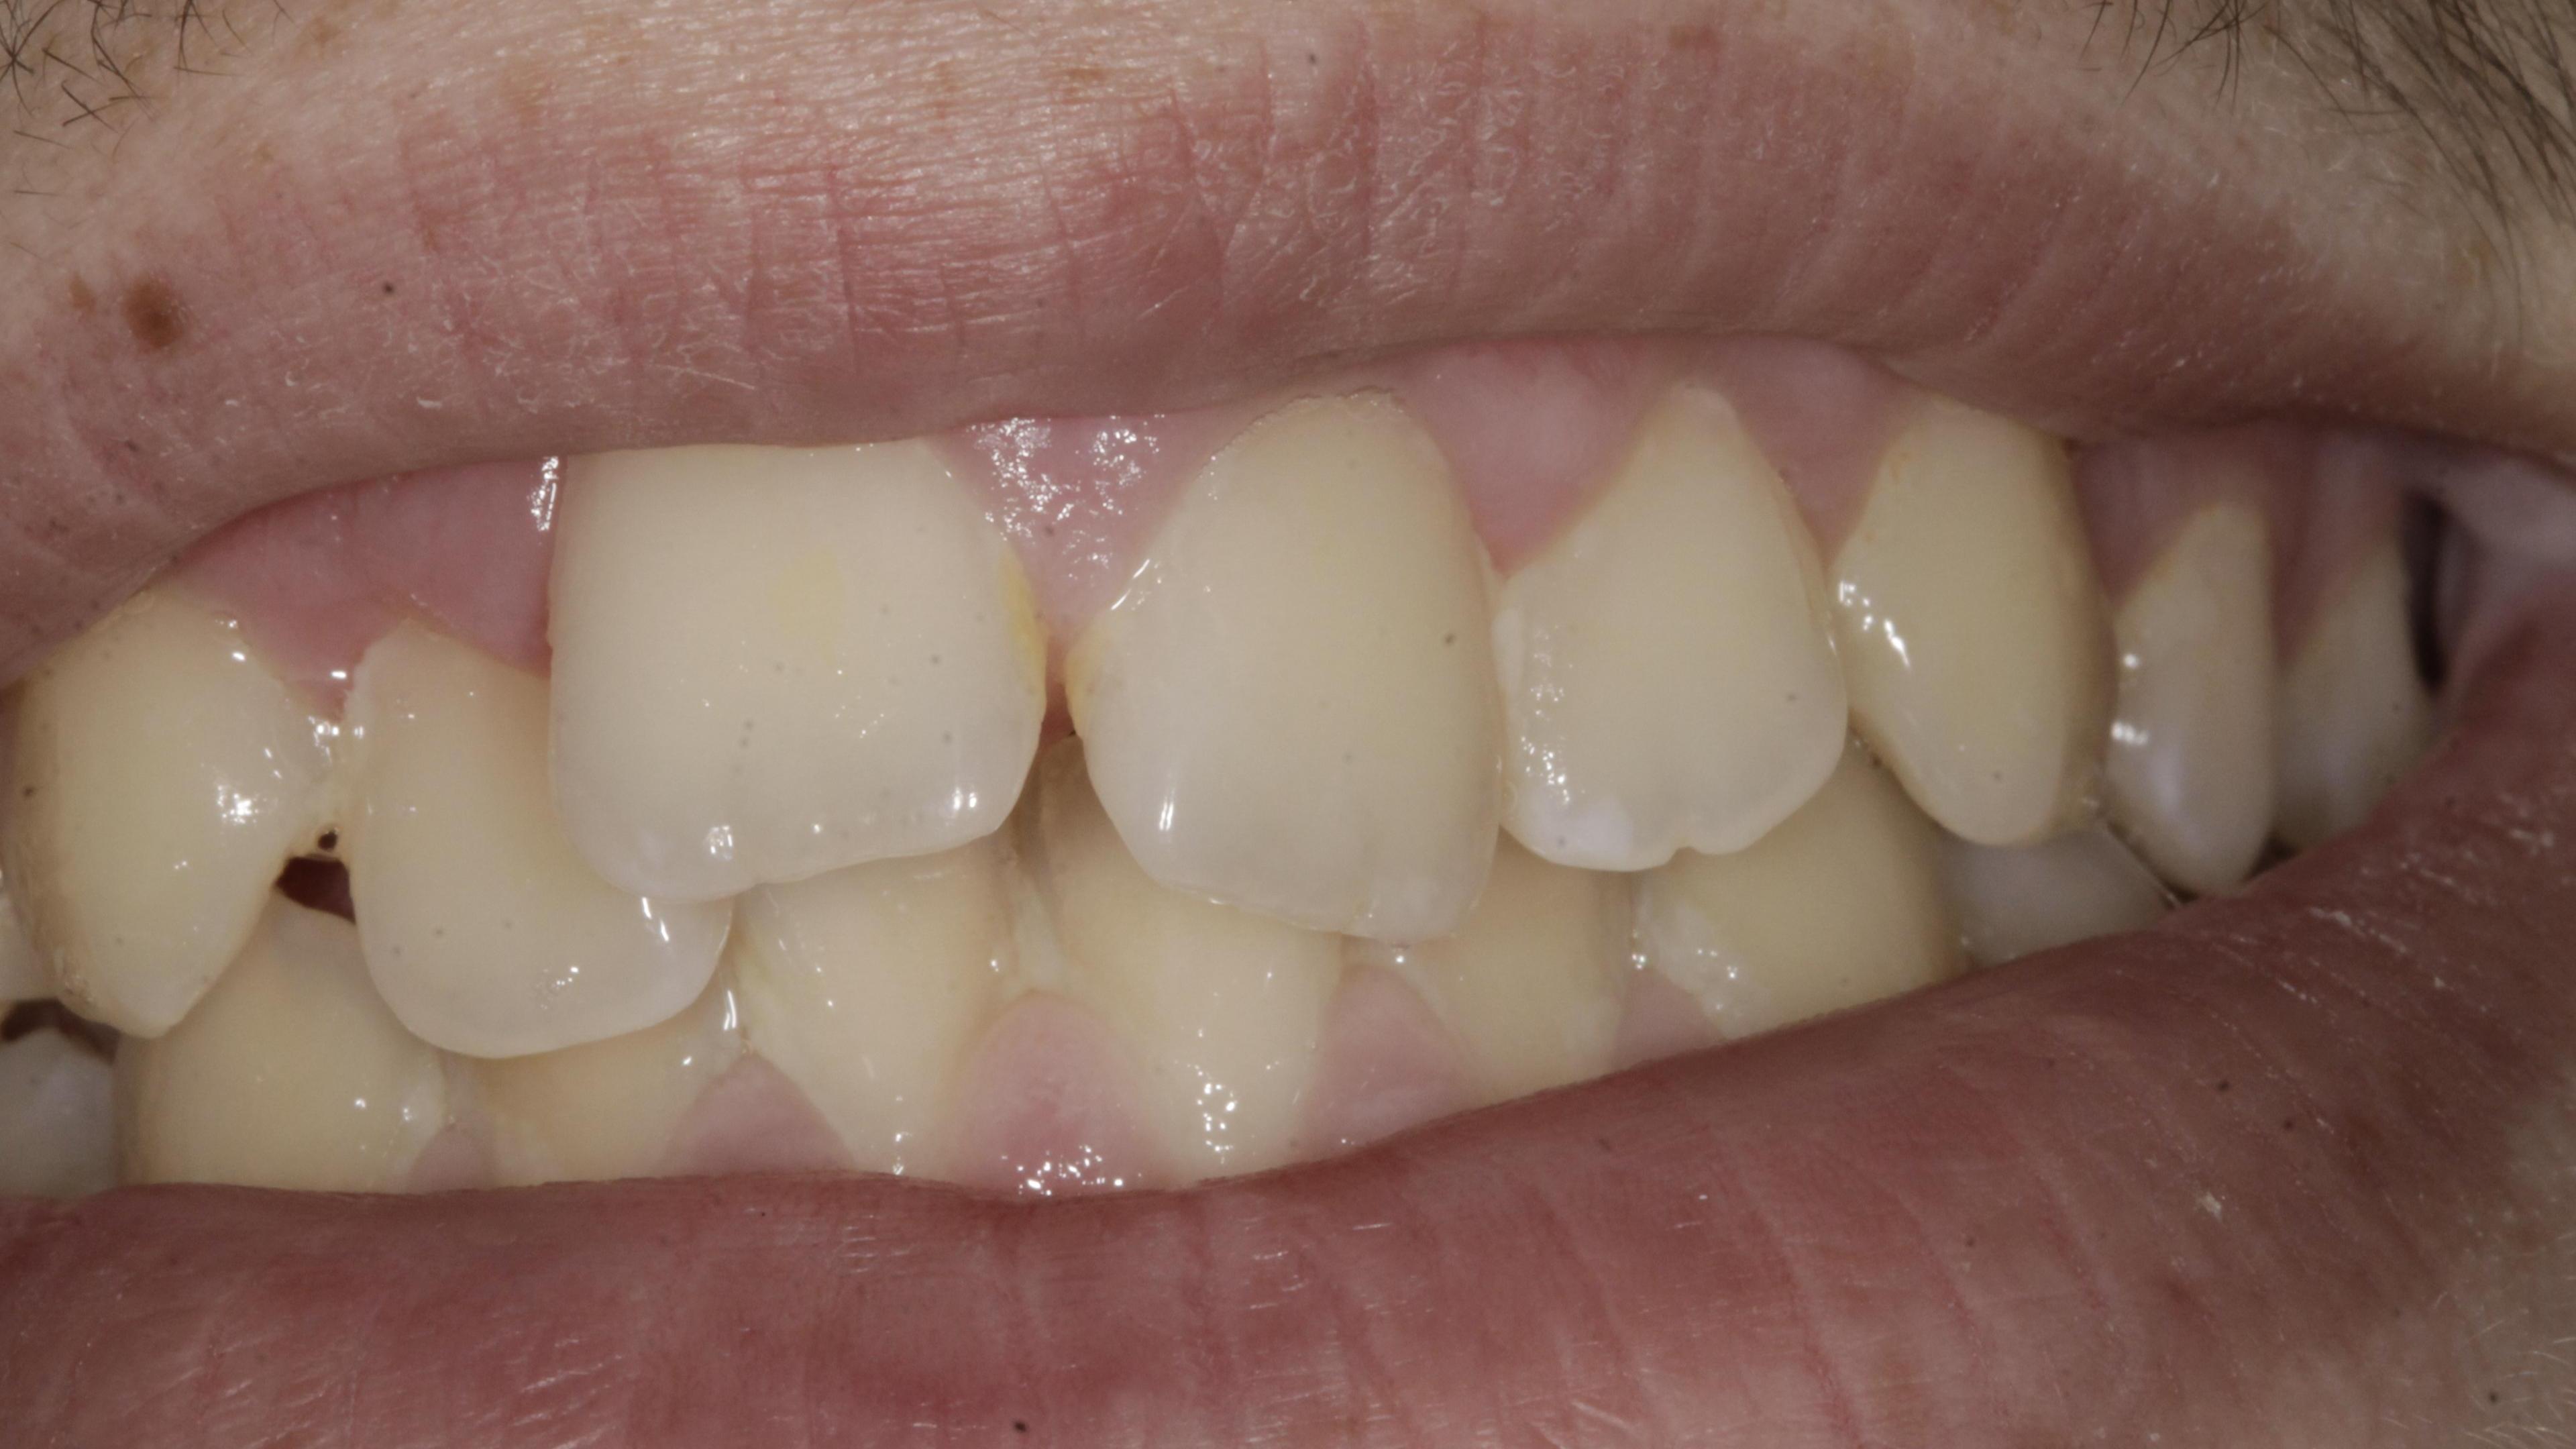 Orthodontc treatment in children Before treatment - Upper dental arch constriction